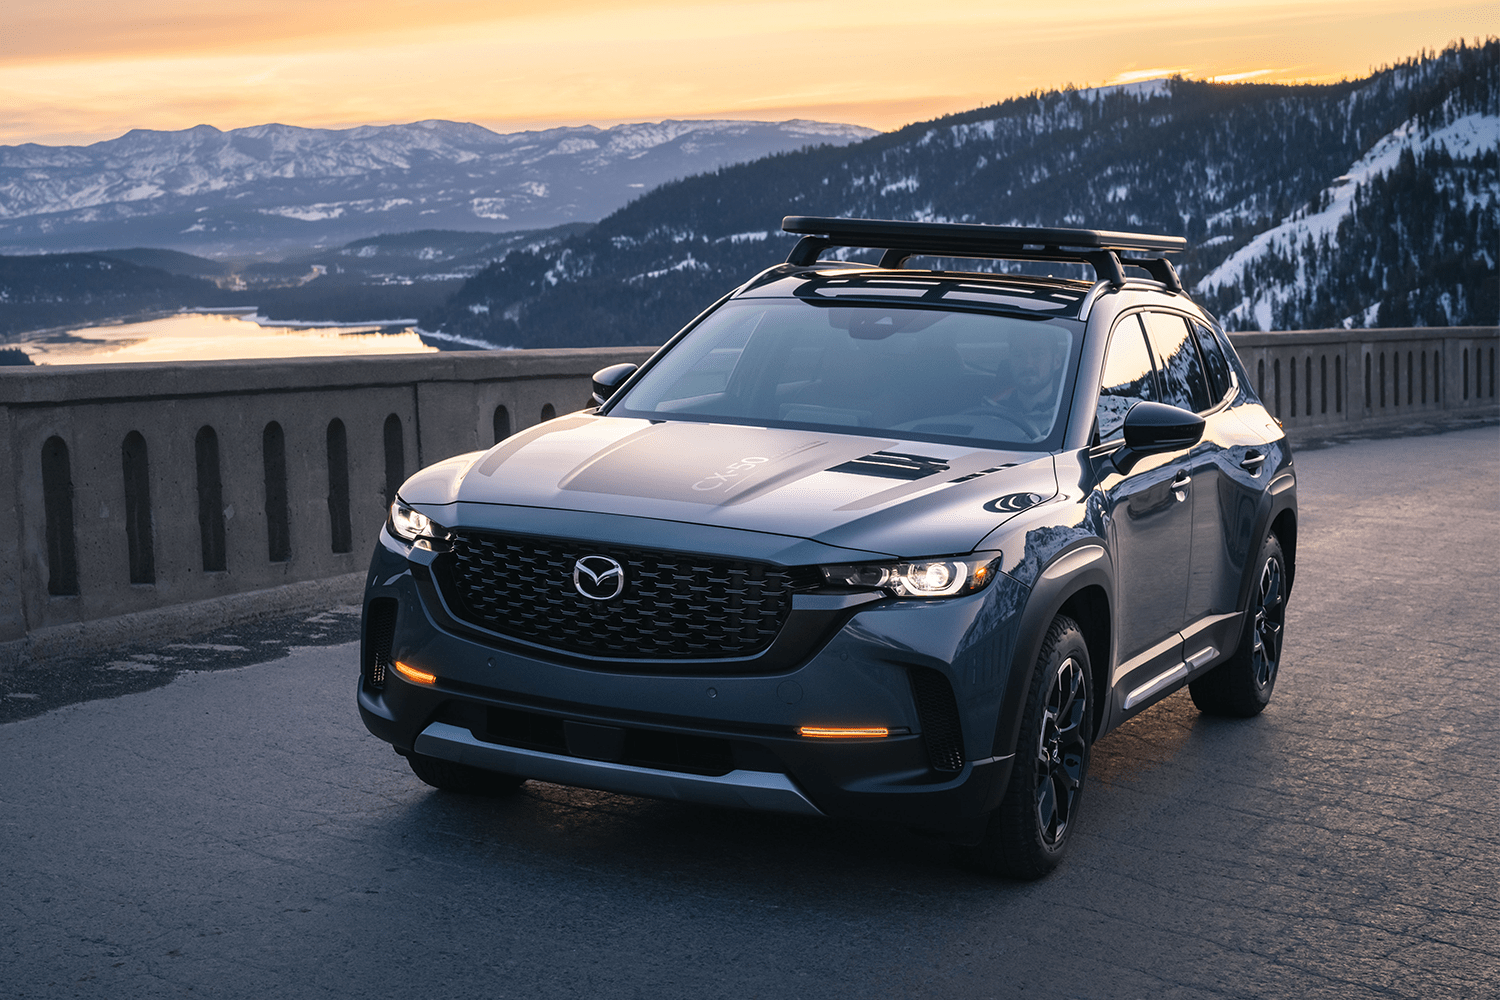 The new Mazda CX-50, an SUV that's similar to the Mazda CX-5, driving down the road at sunset